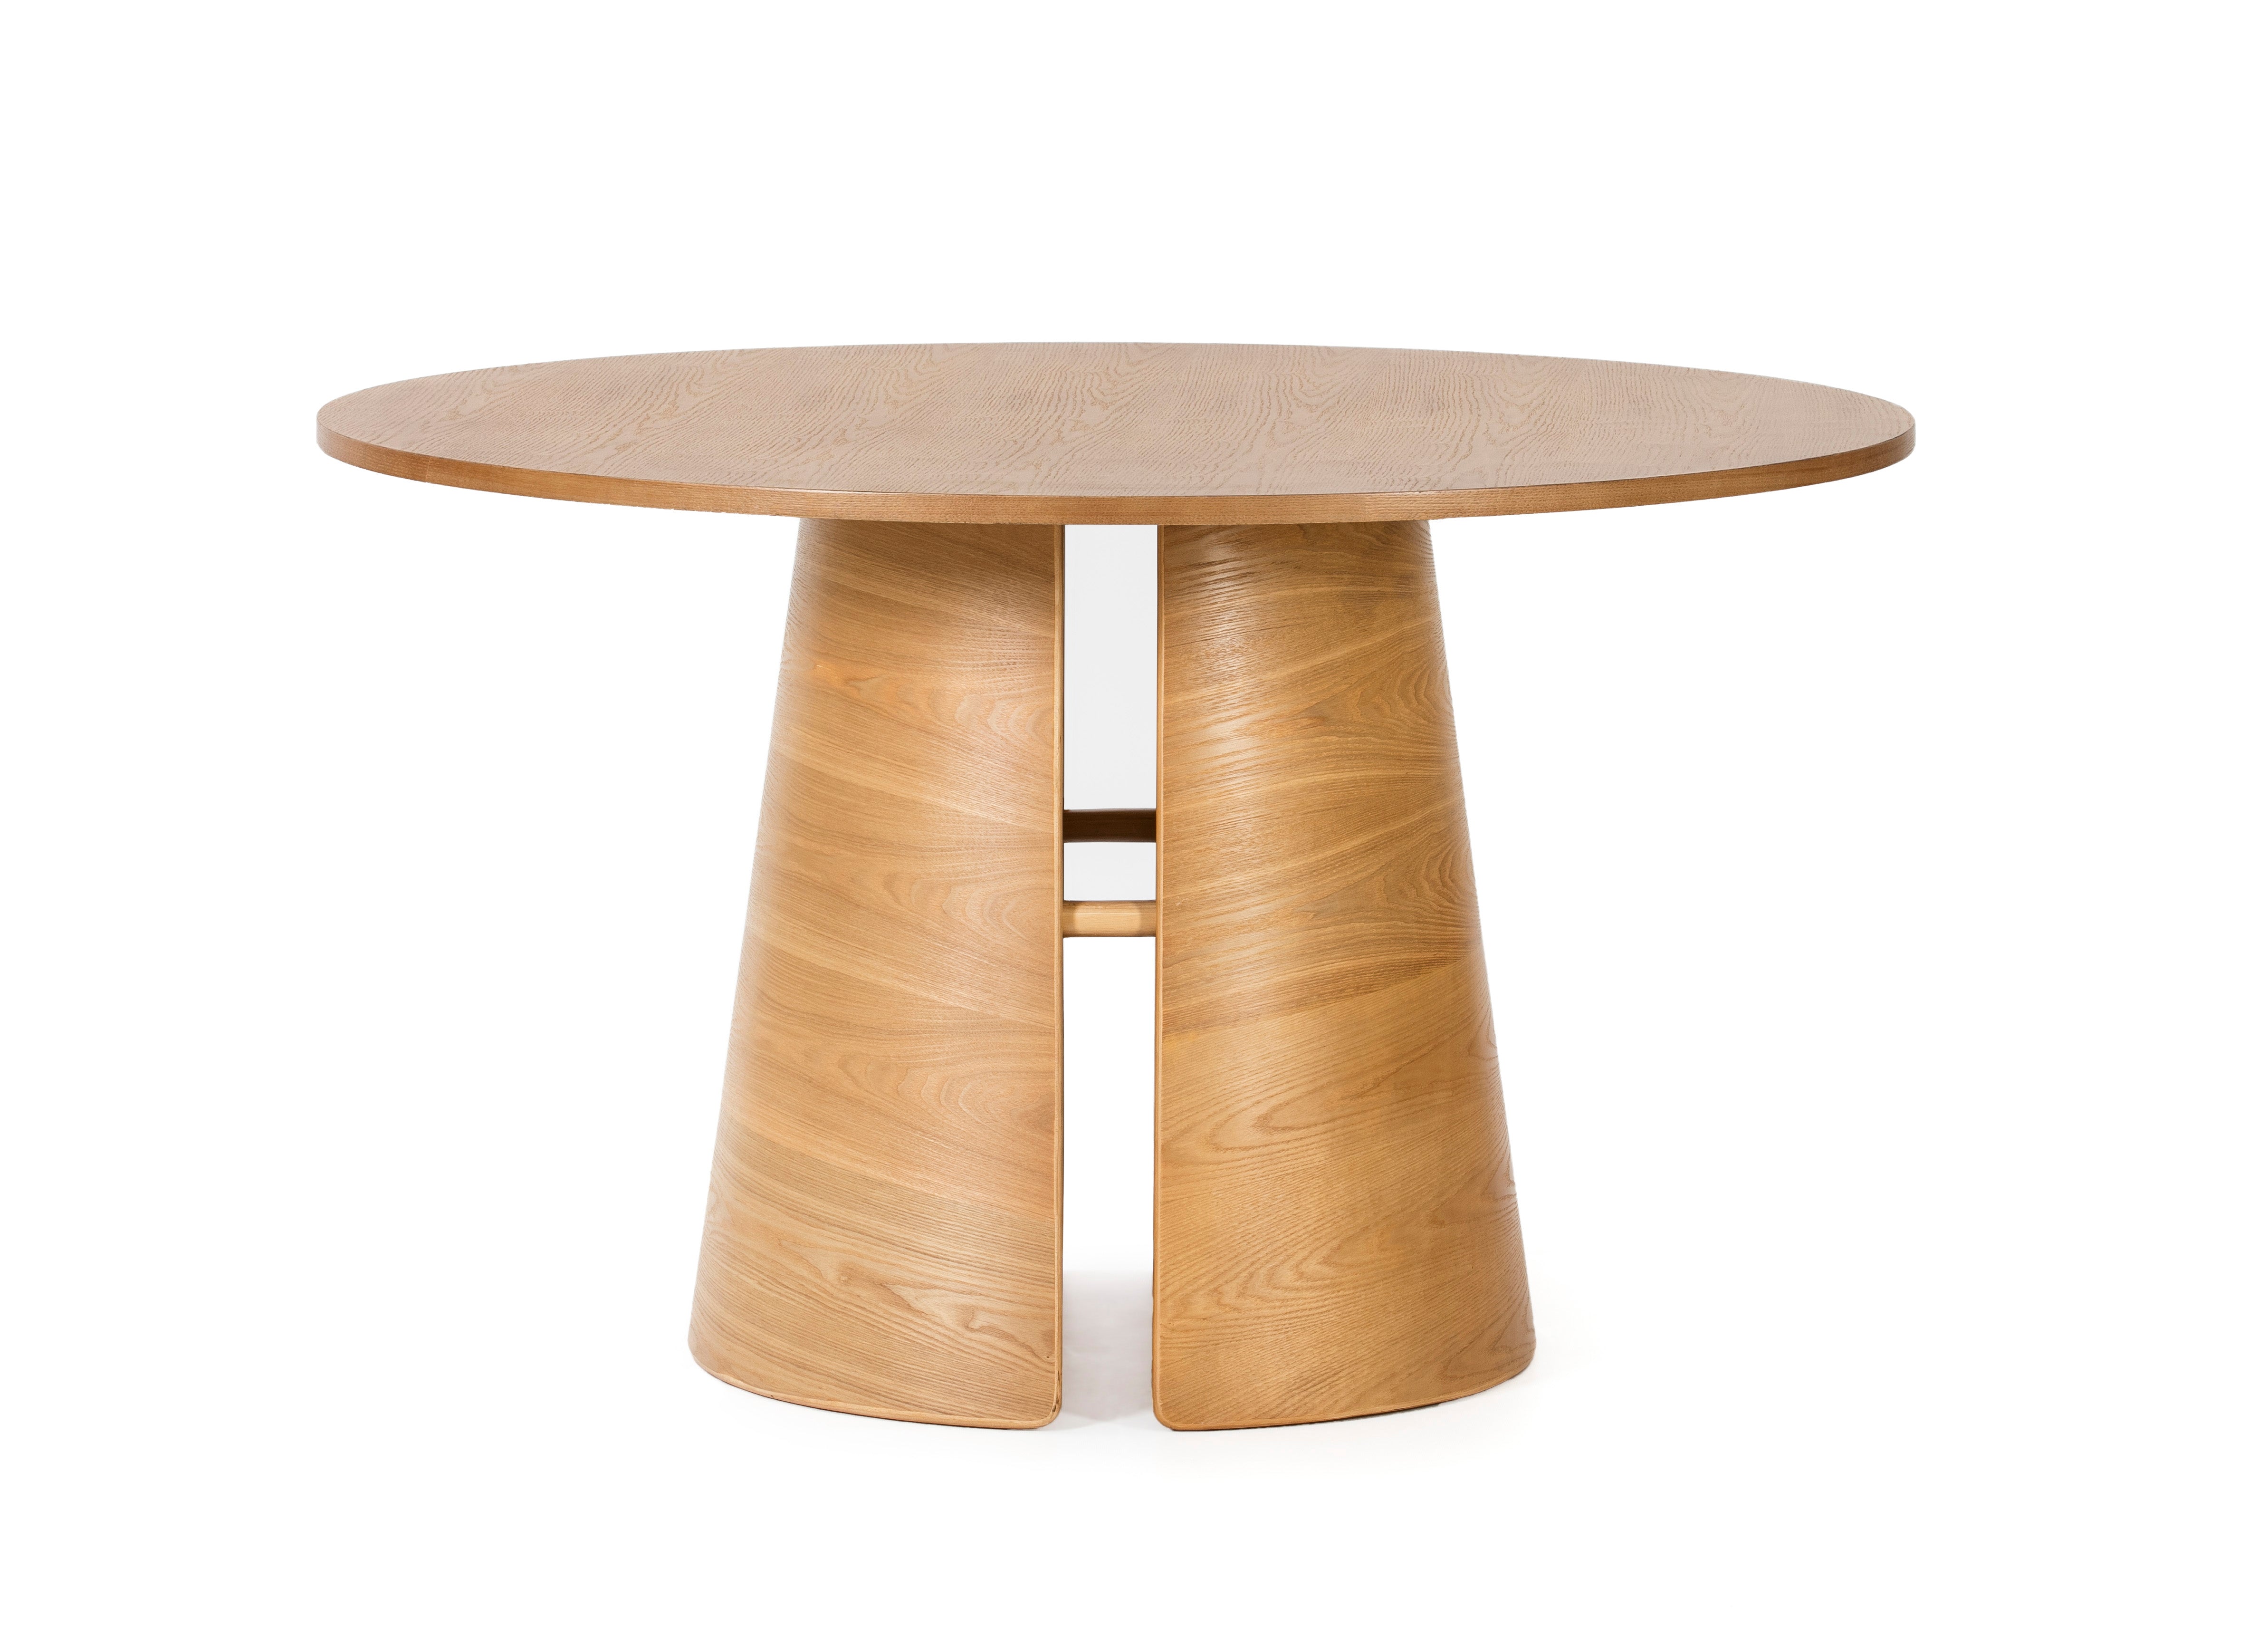 CEP wooden round table